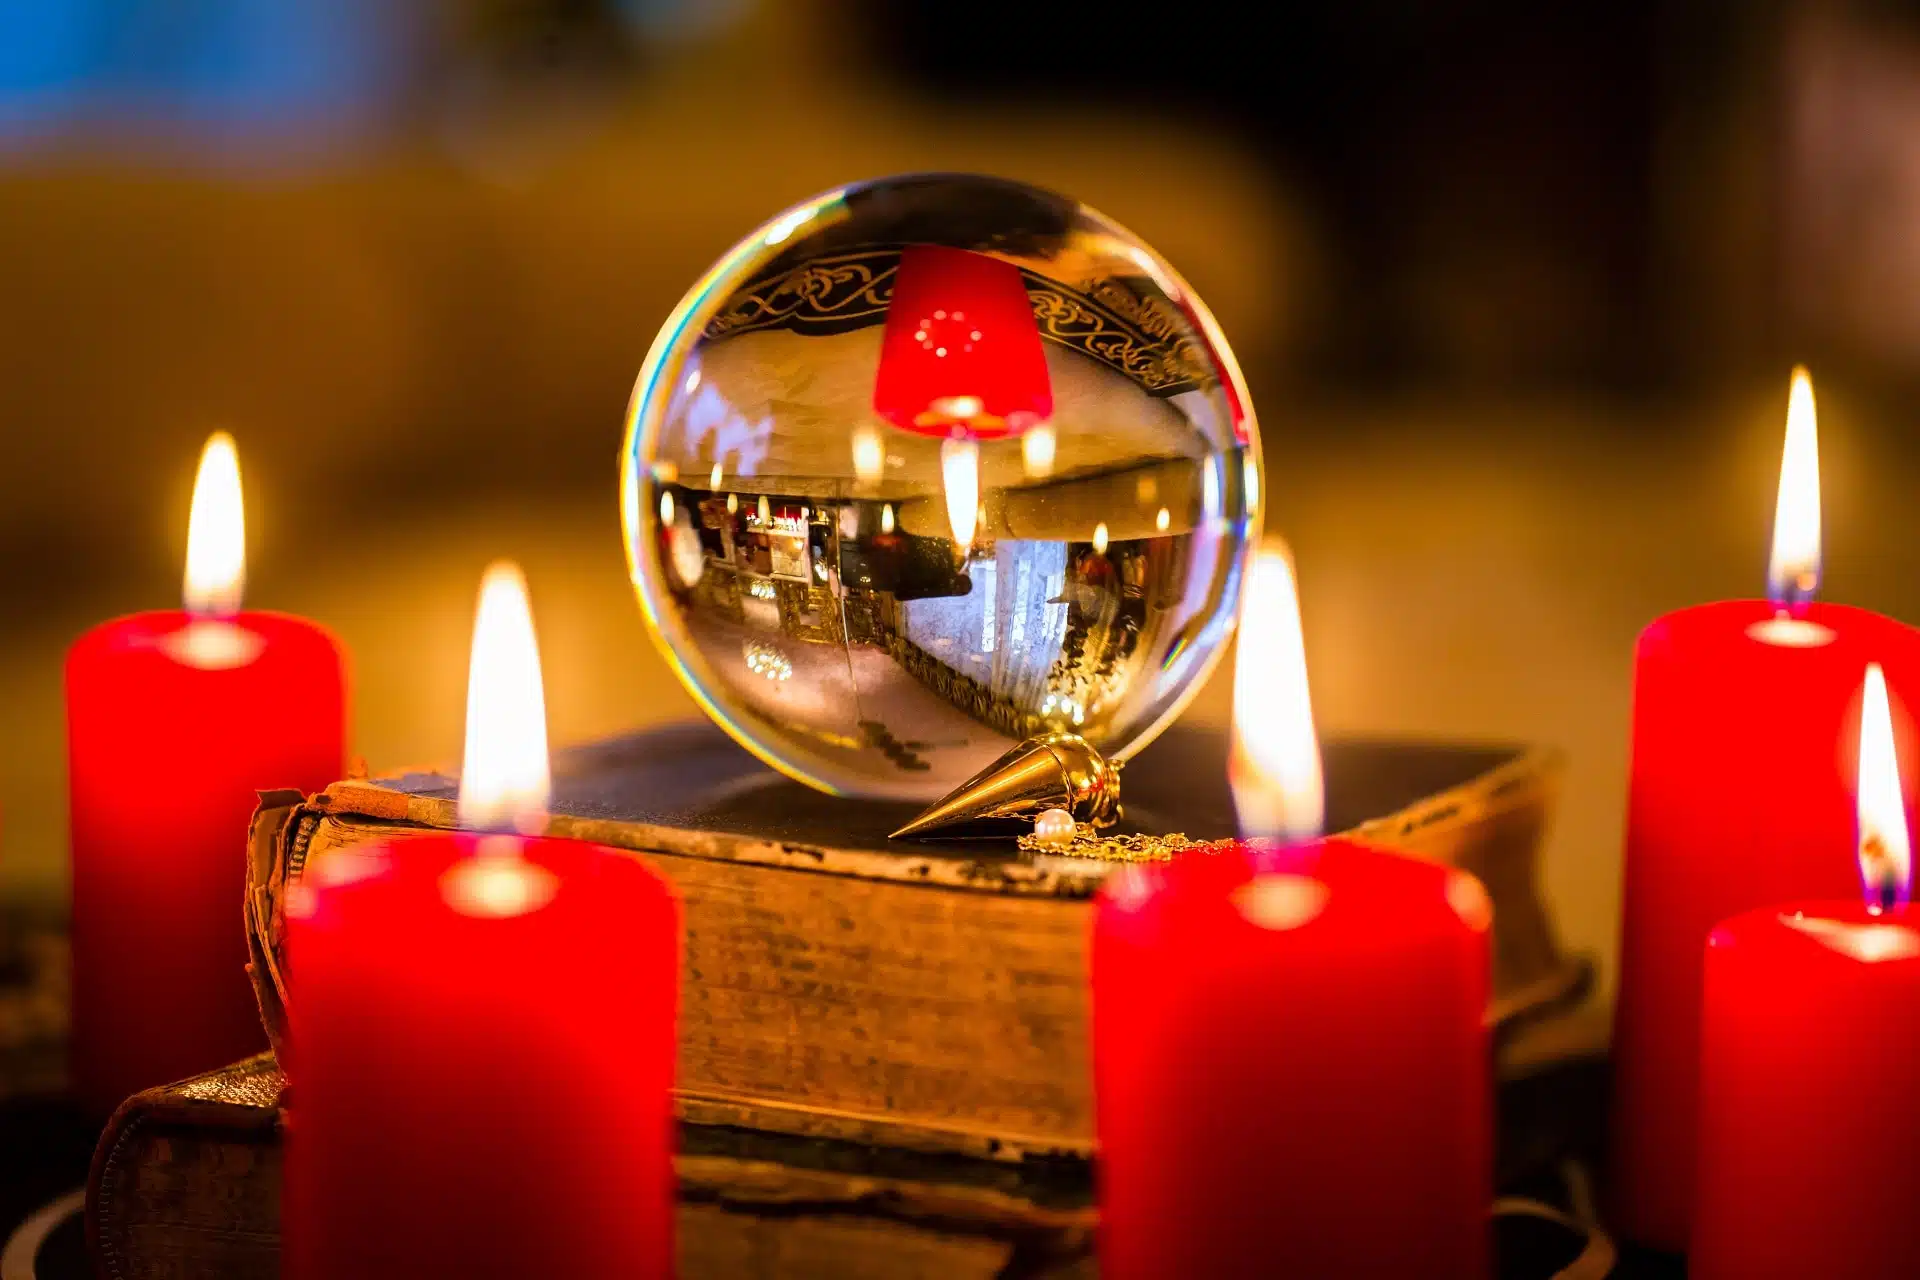 Crystal ball in the candle light to prophesy